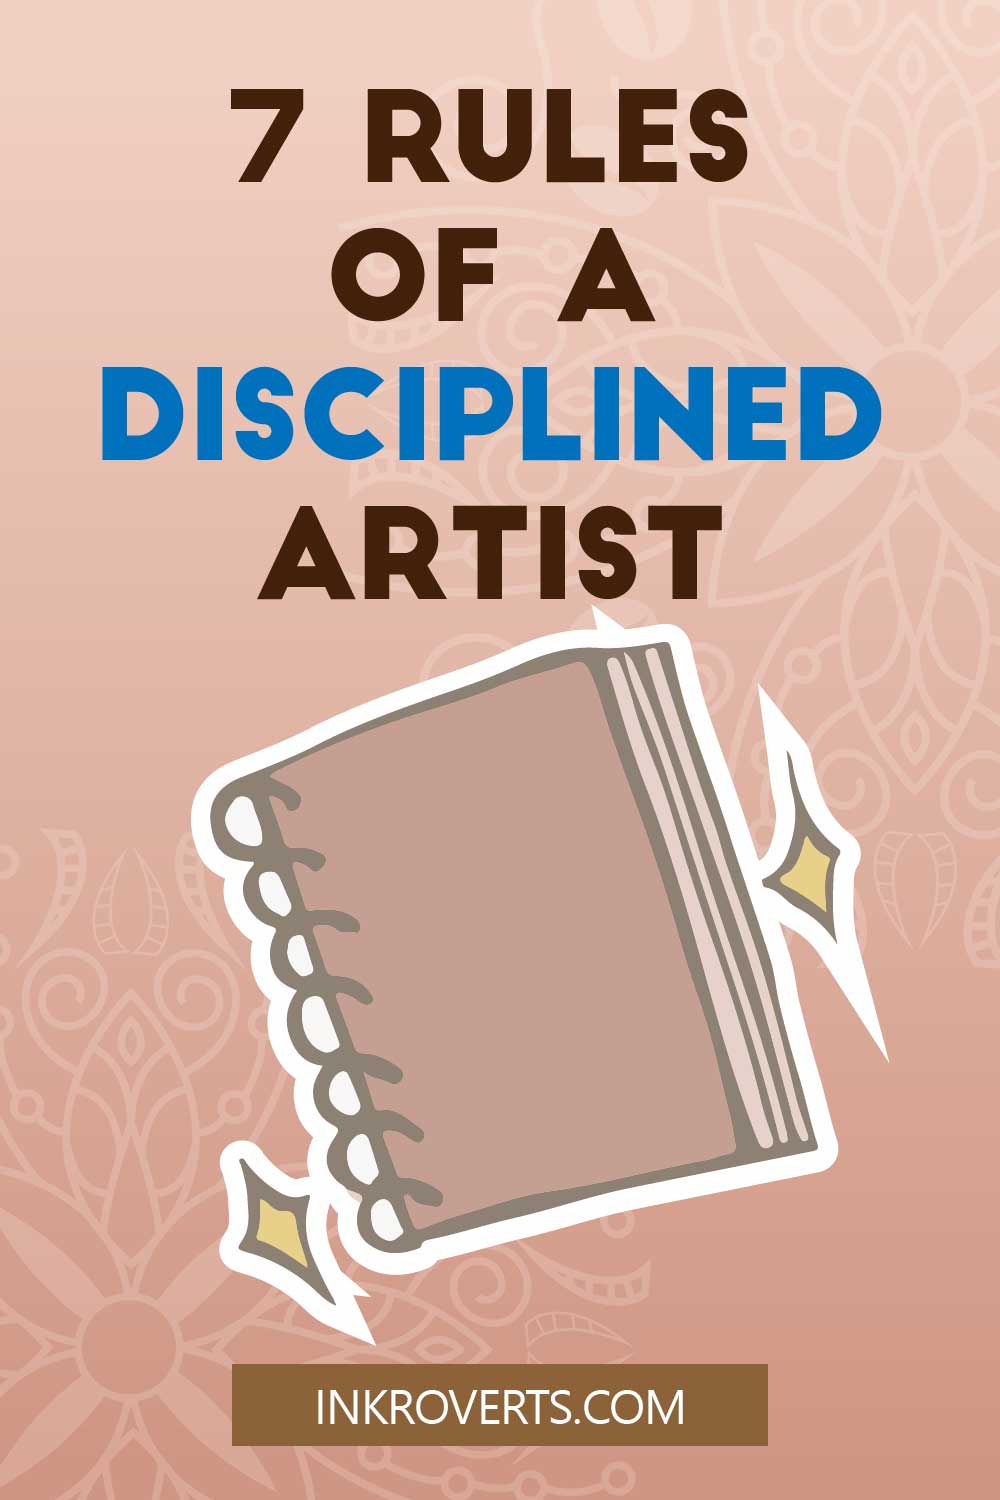 7 Rules of A Disciplined Artist